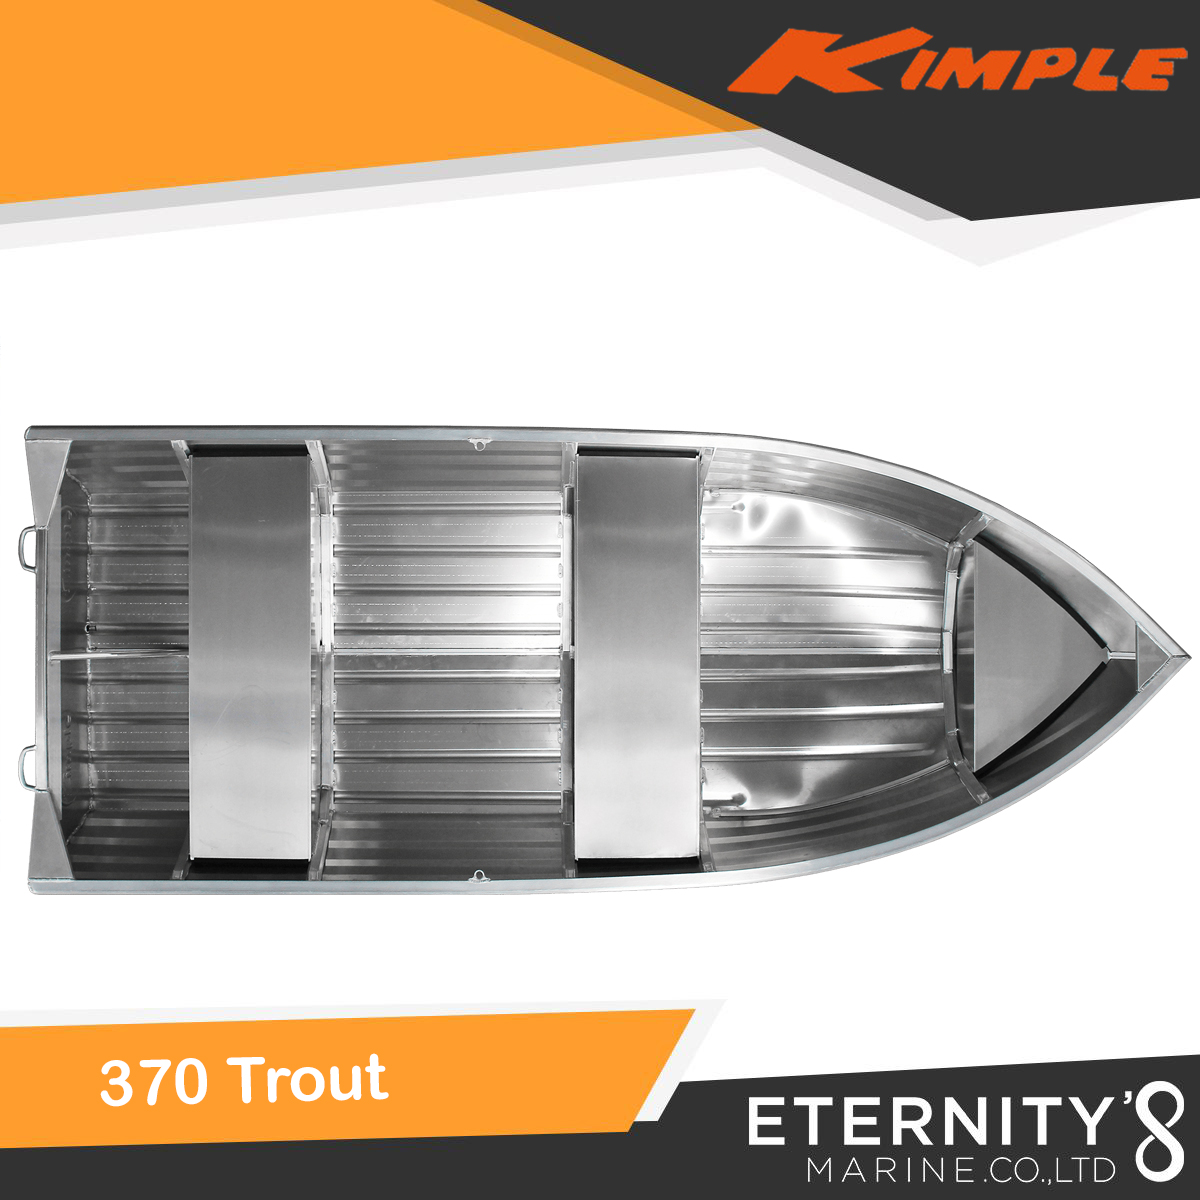 Kimple 370 Trout